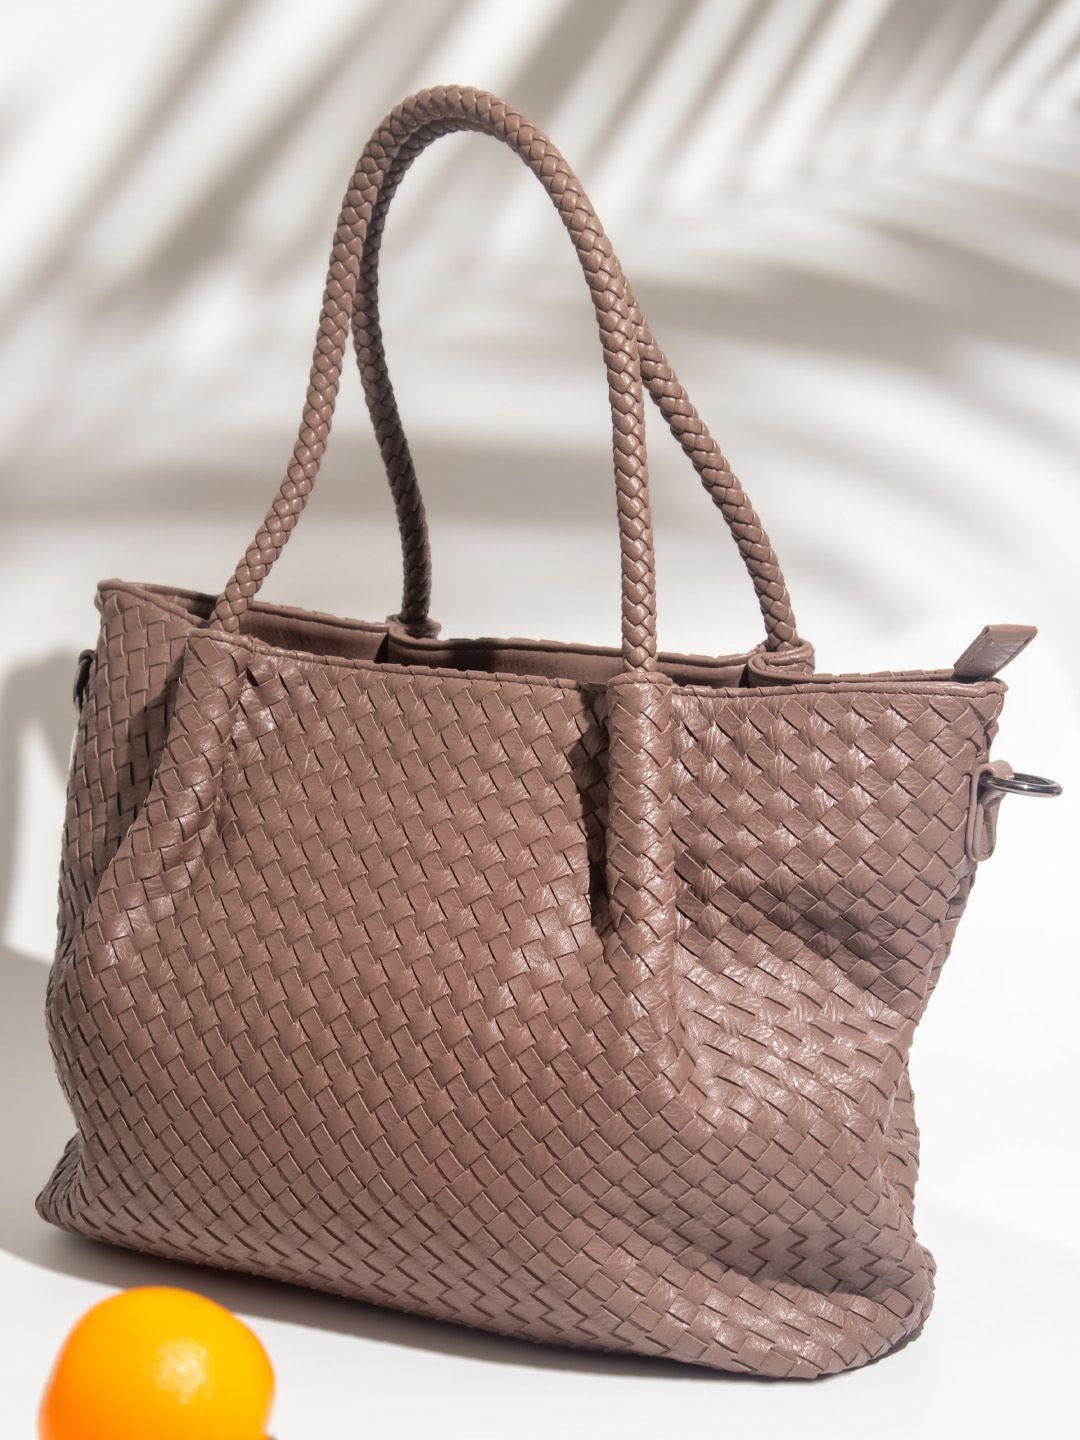 inc 5 structured handheld bag with quilted